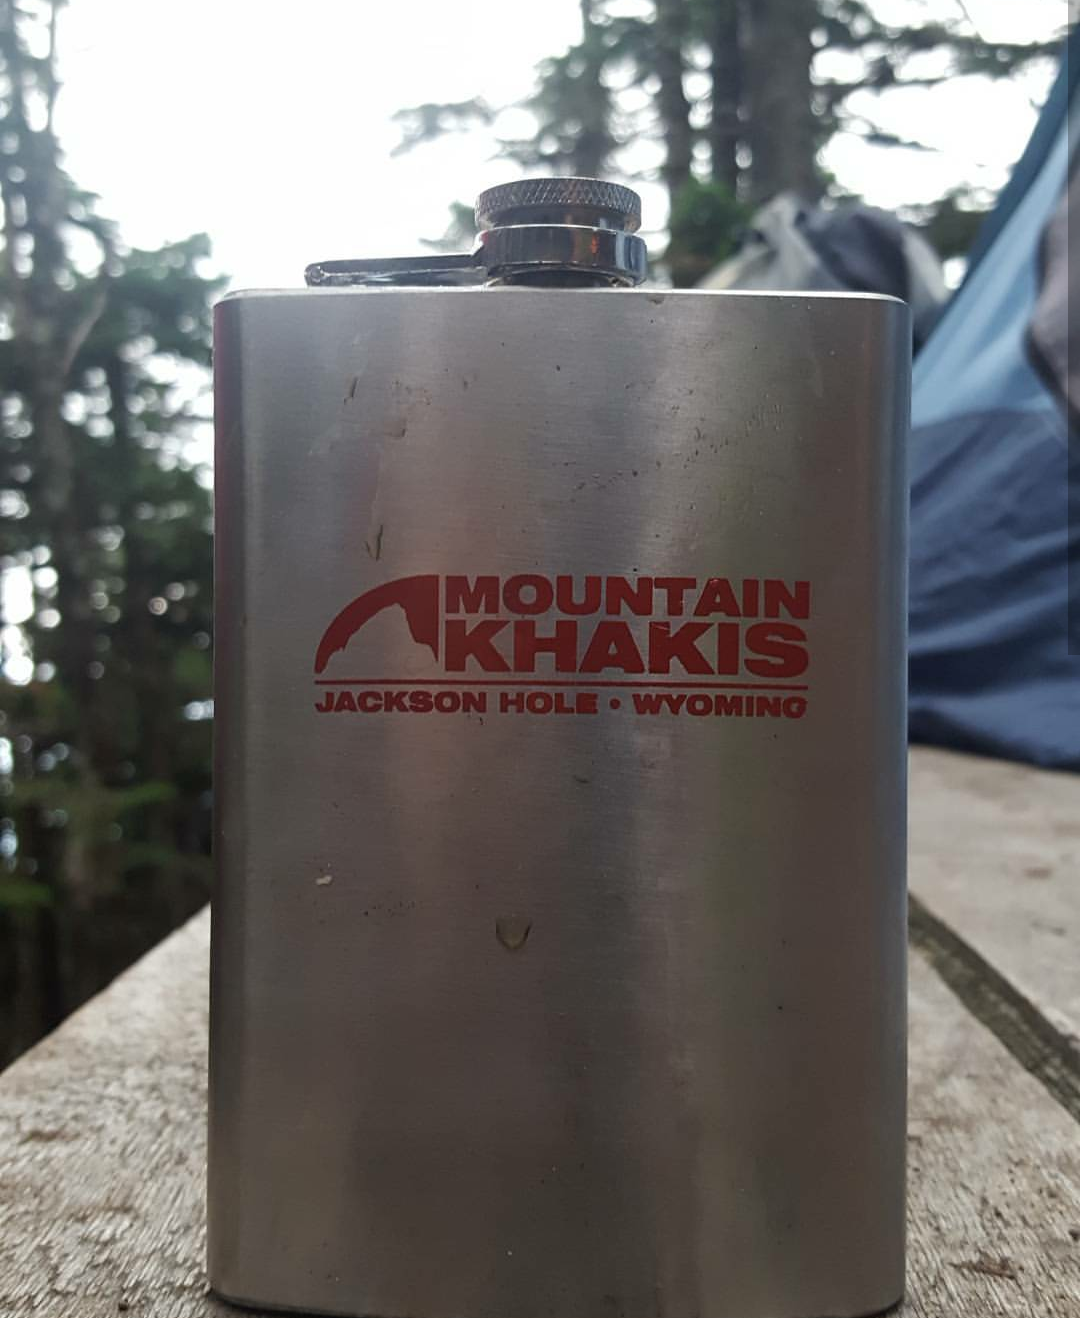 Getting to use my flask from winning the mountain khakis contest!